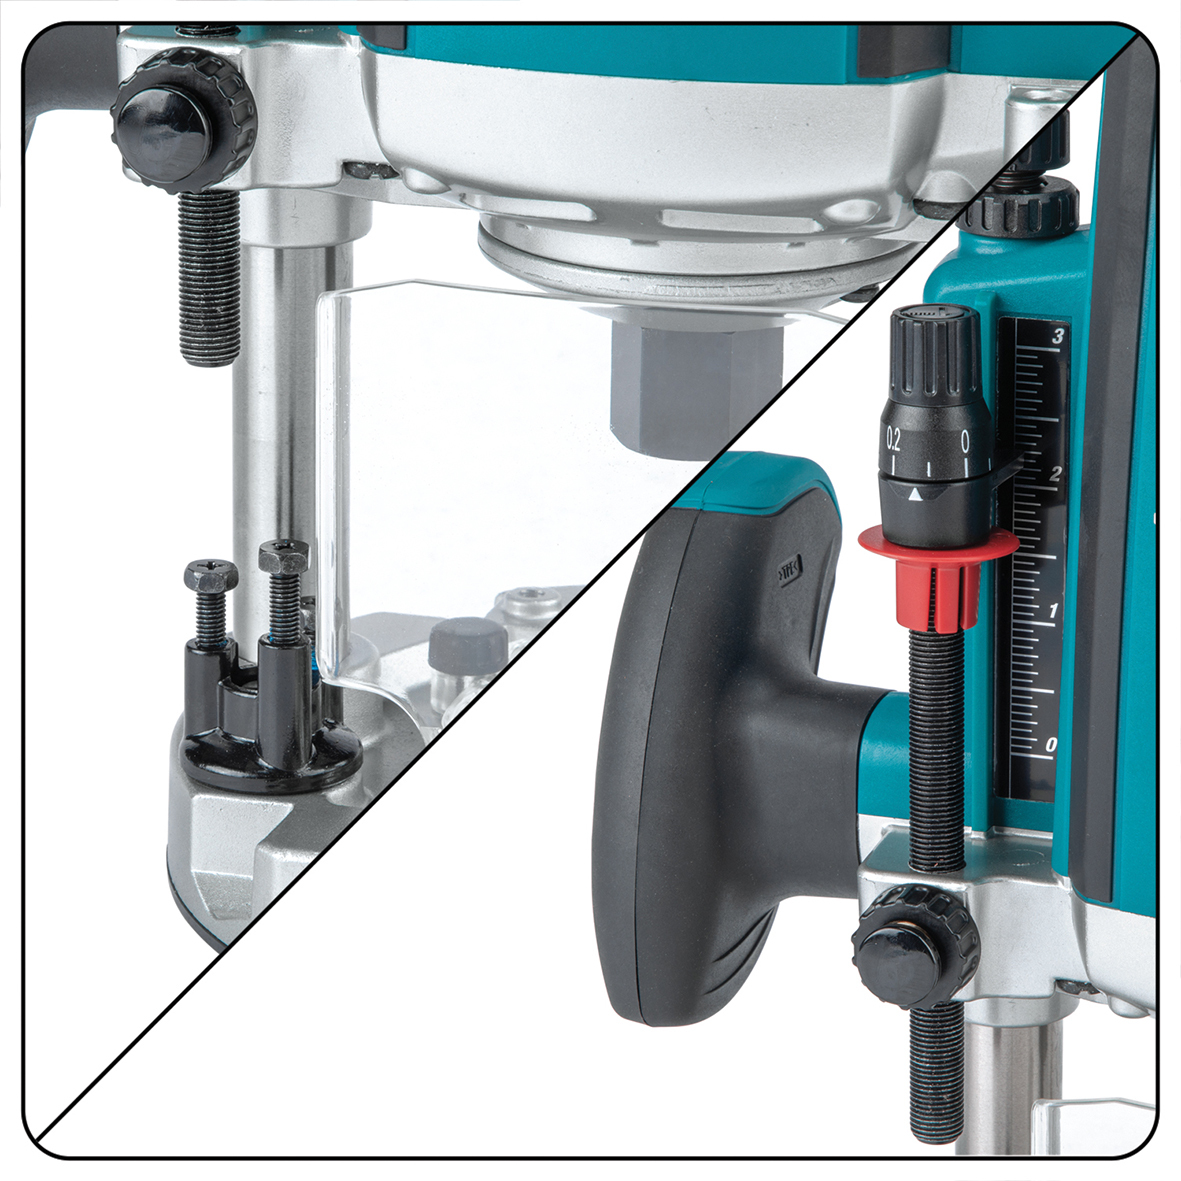 Makita 2100W 12.7mm (1/2") Plunge Router RP2301FC05